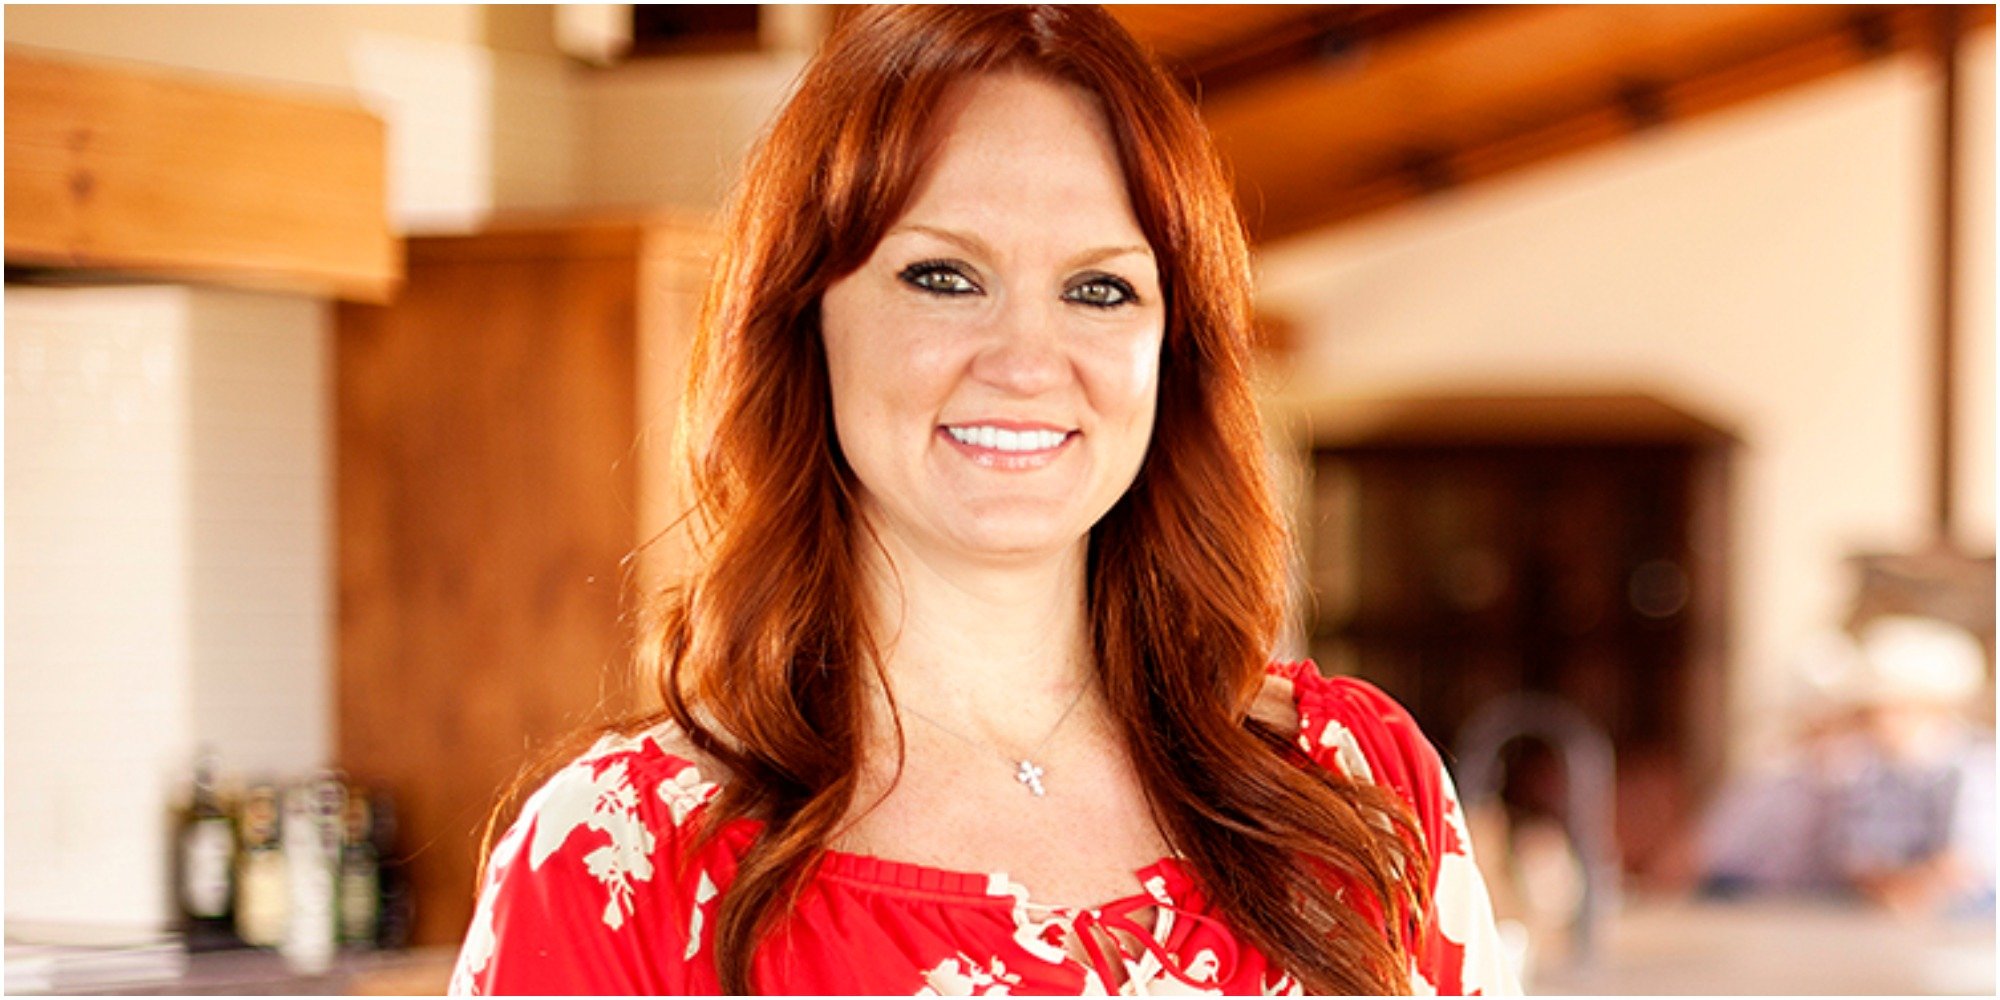 The Pioneer Woma Ree Drummond poses for a press photograph in a floral blouse.